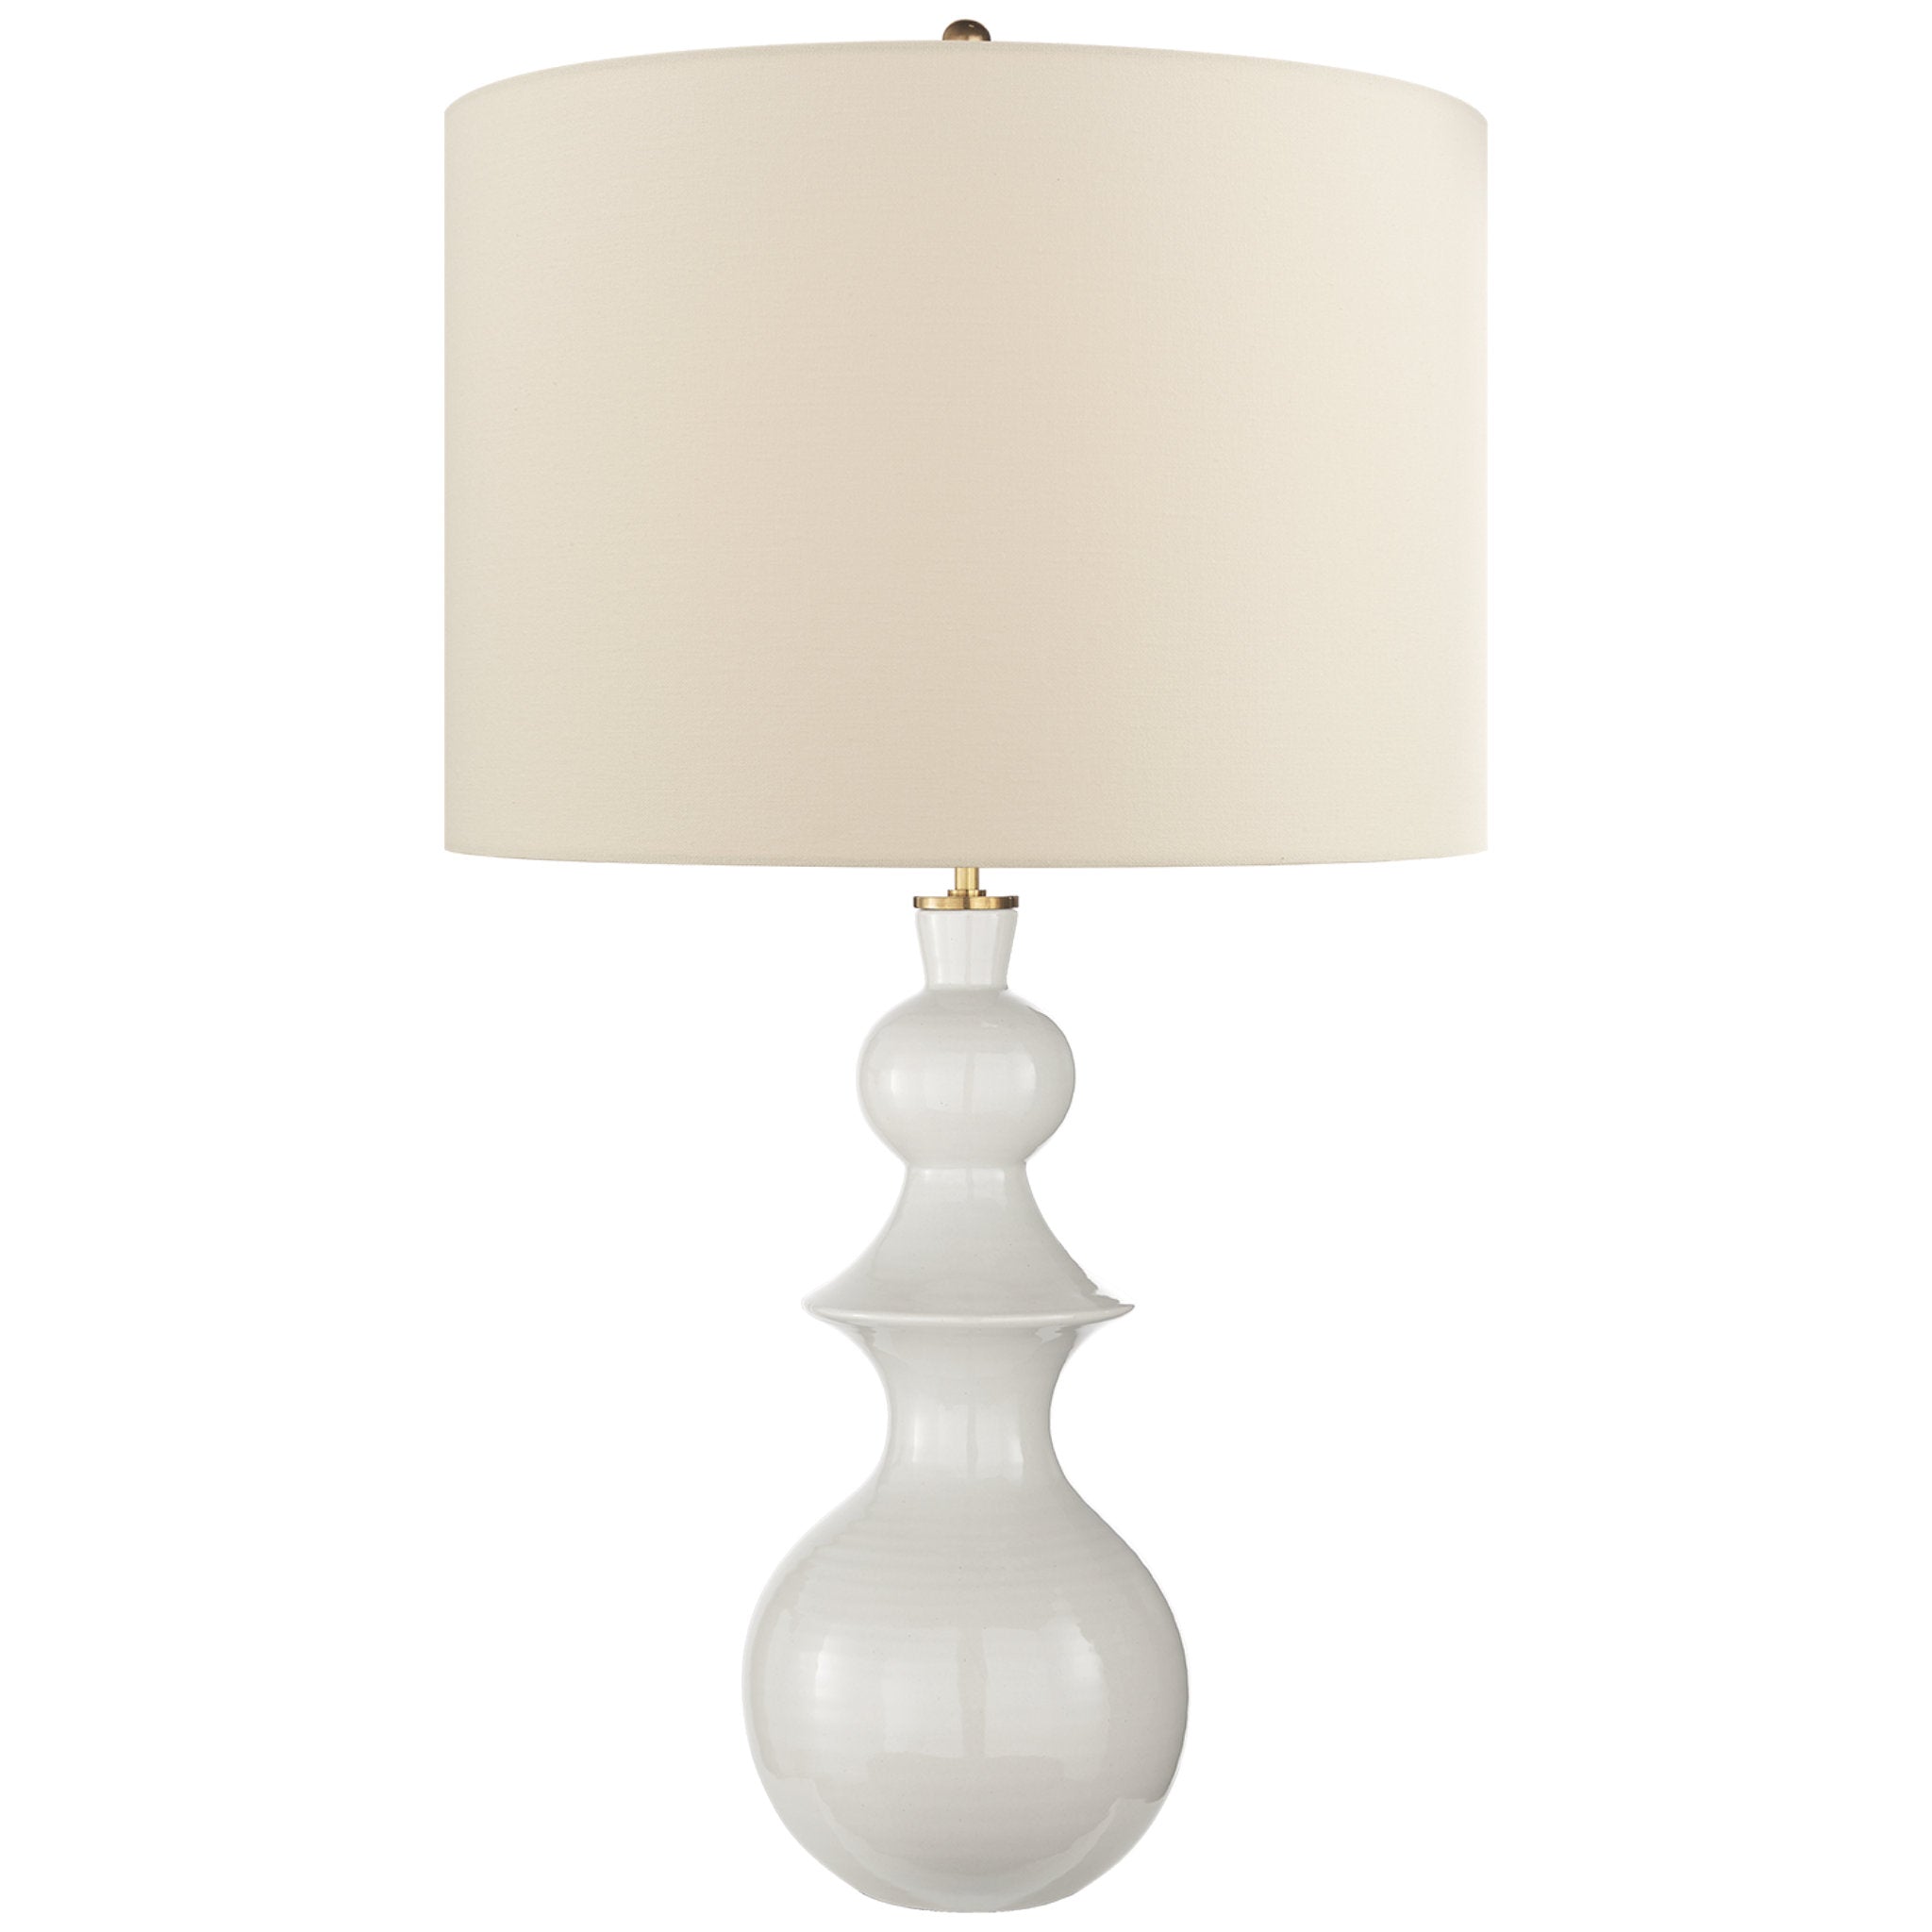 kate spade new york Saxon Large Table Lamp in New White with Cream Linen Shade